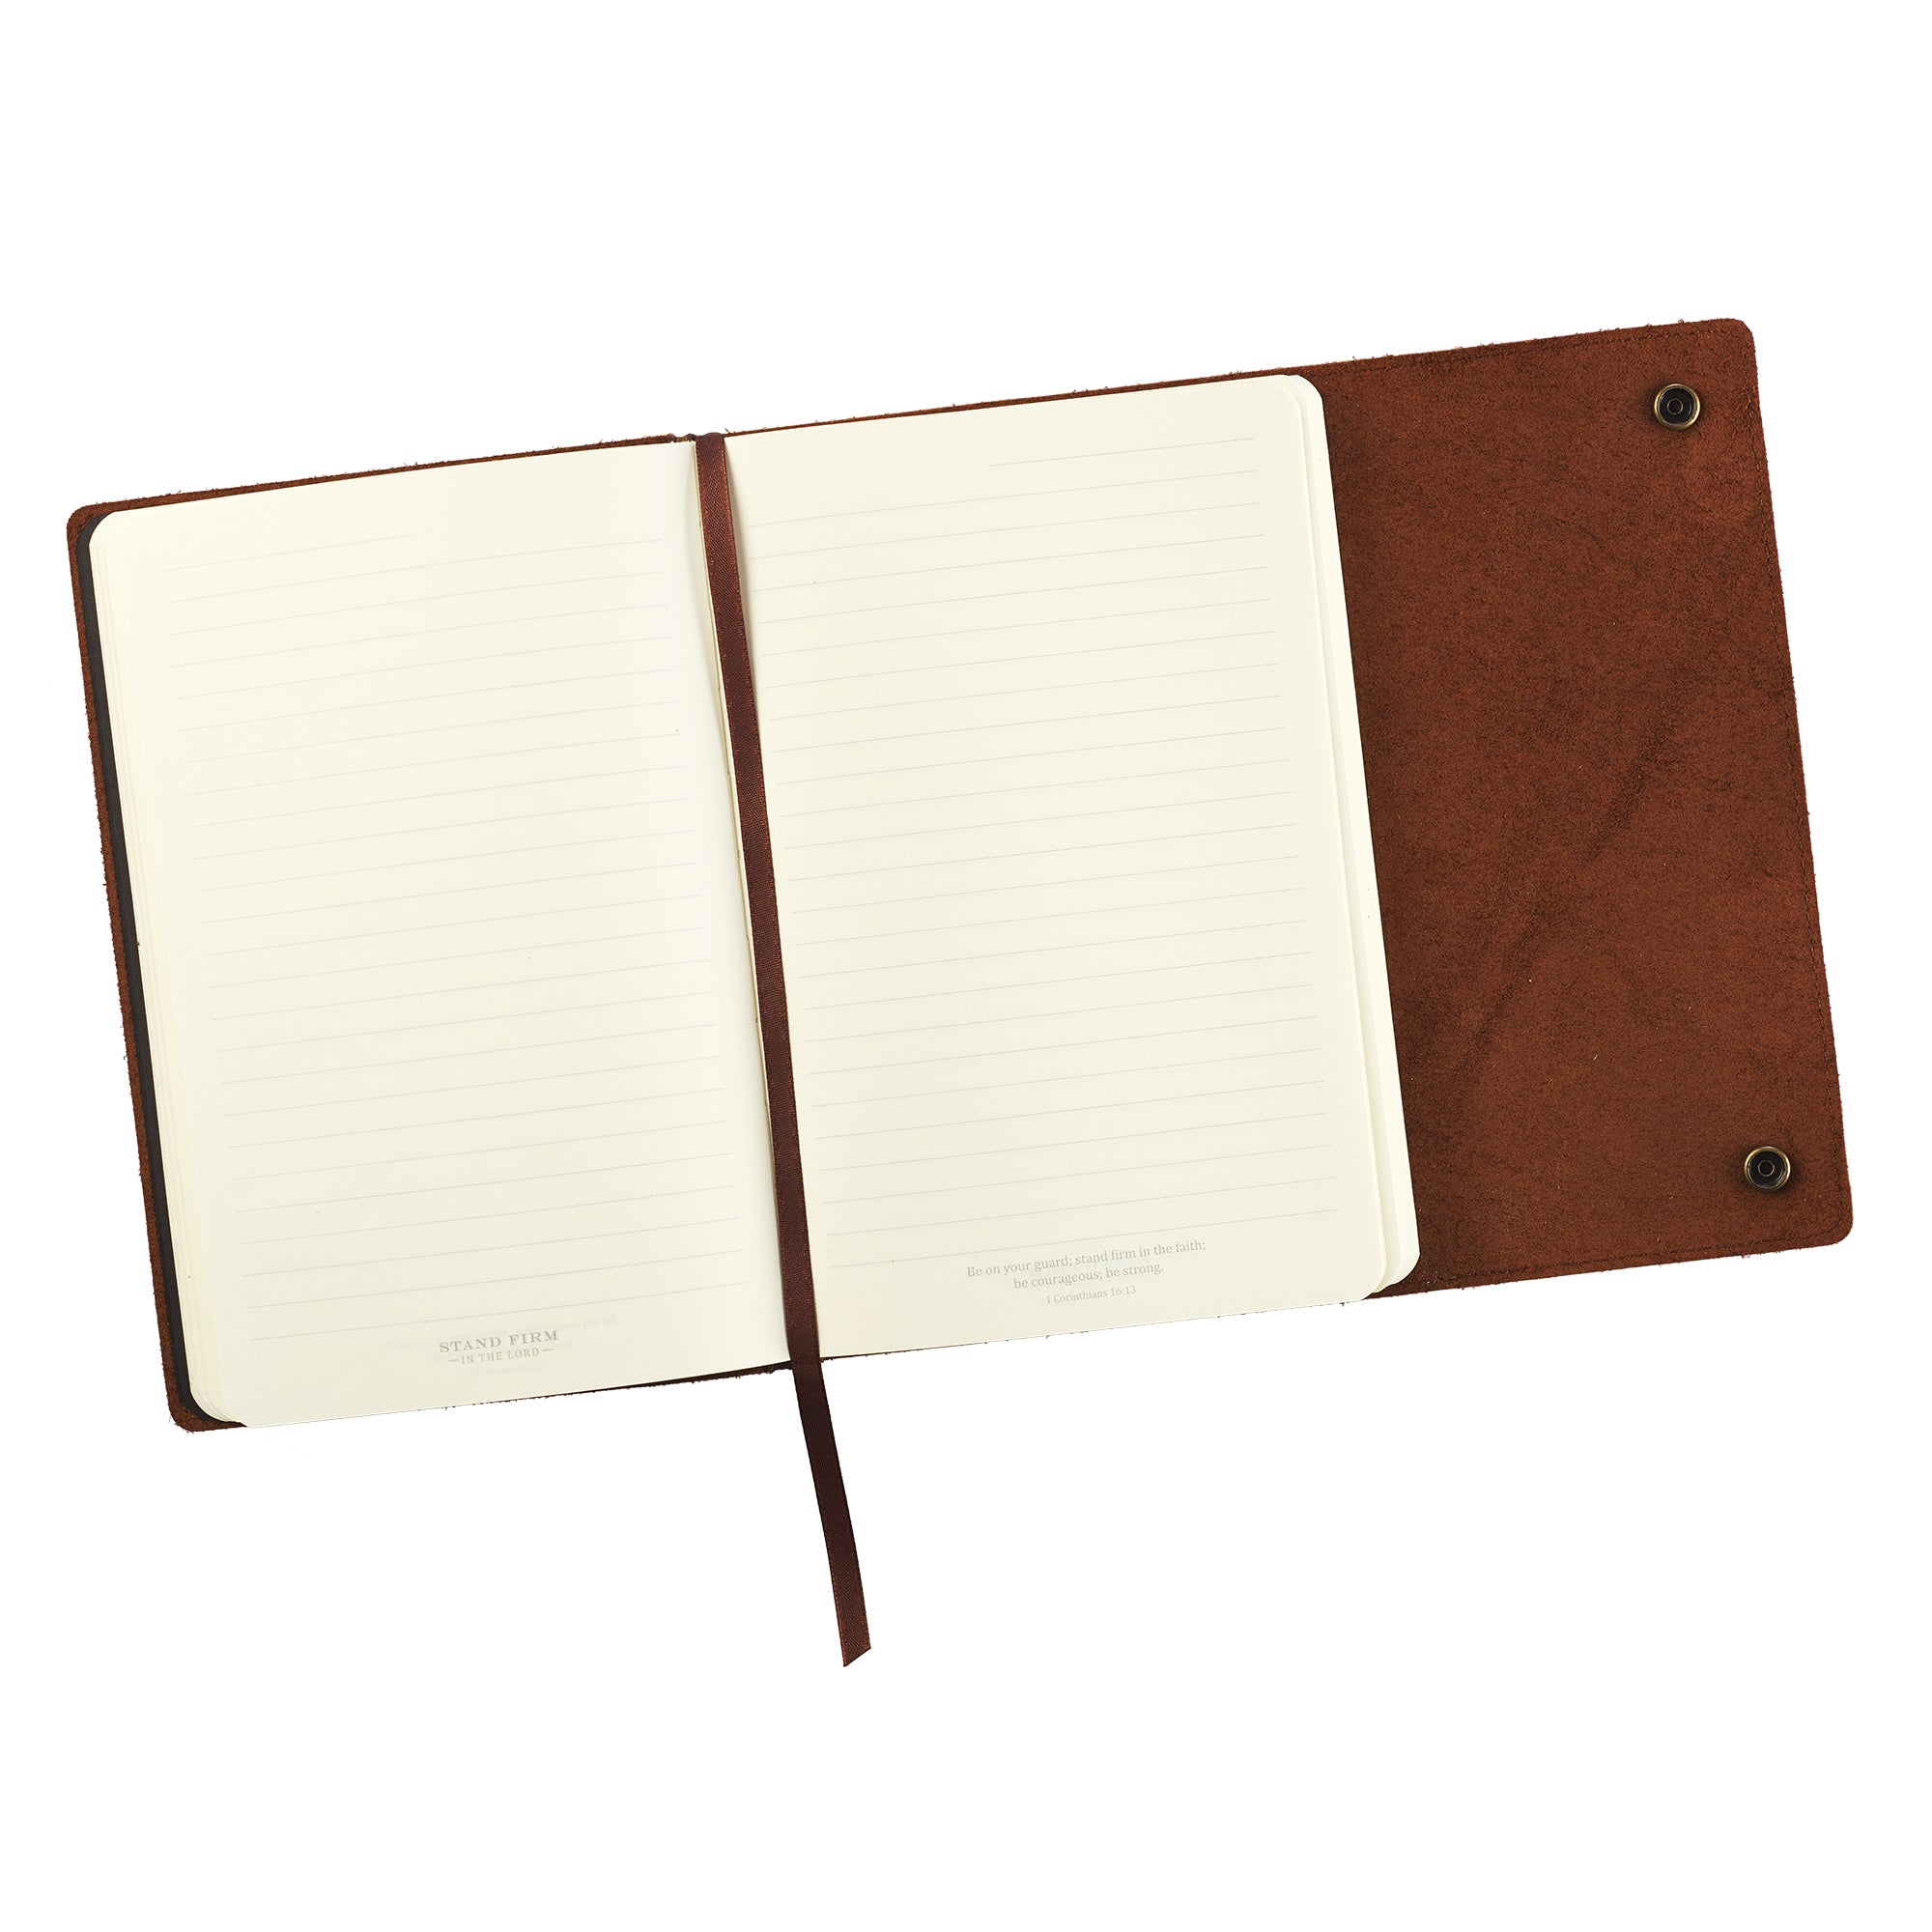 Image of Stand Firm in the Lord Classic Full Grain Leather Journal with Button Closure – Philippians 4:1 other